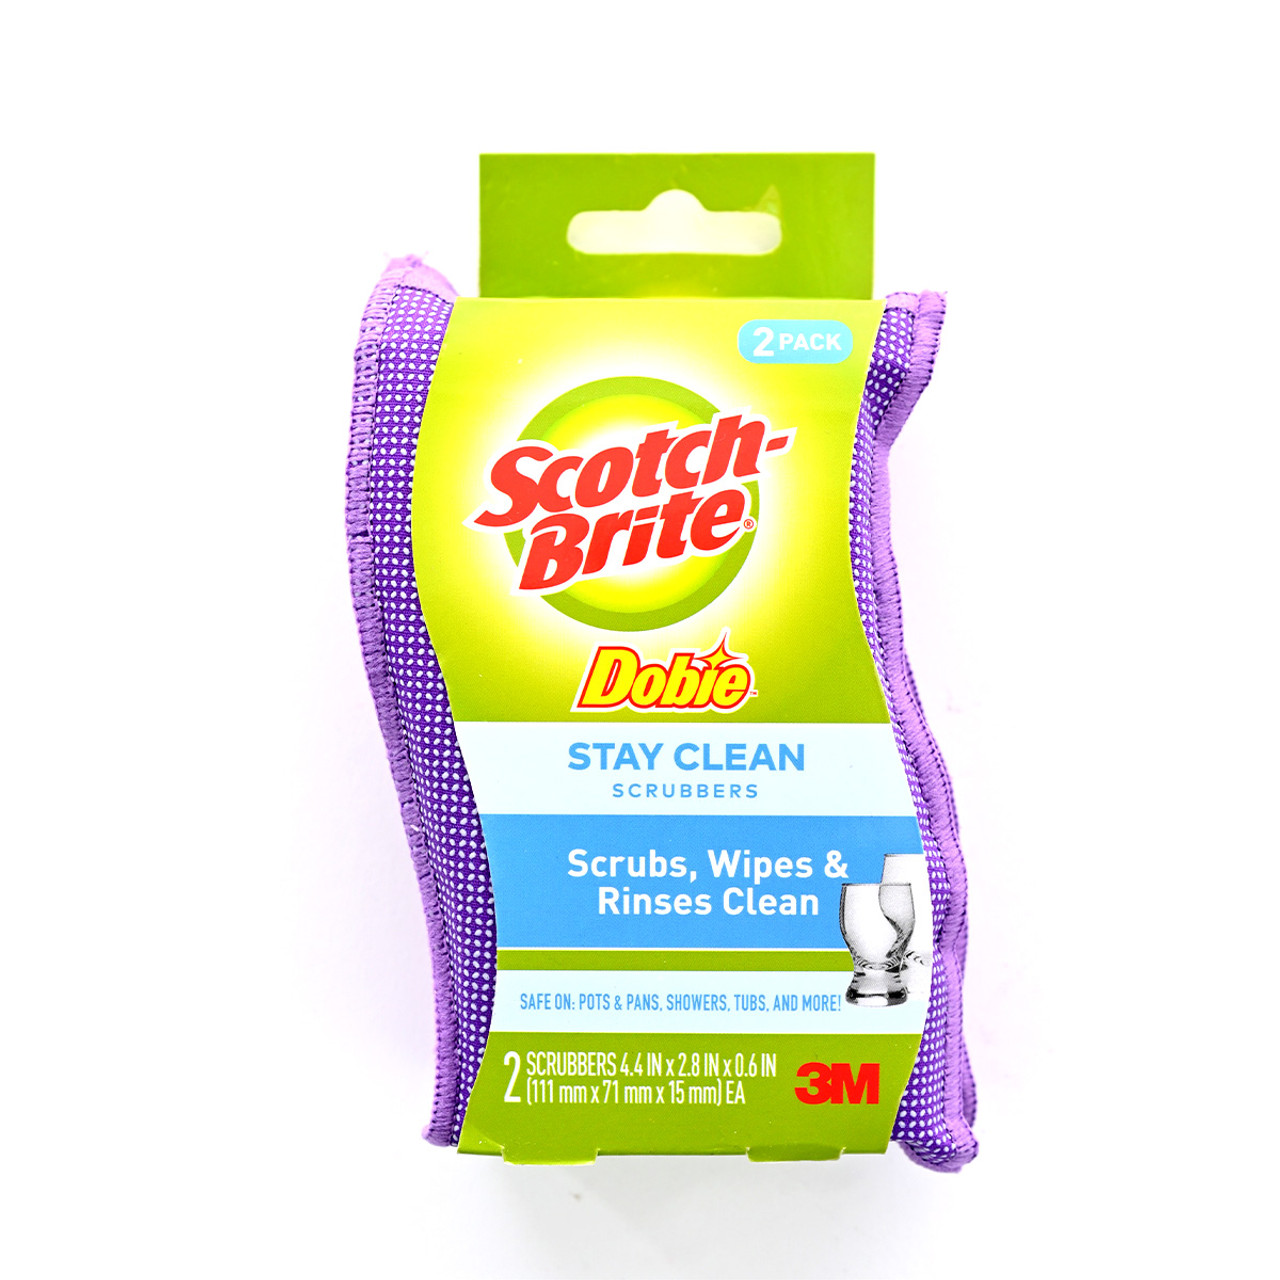 https://cdn11.bigcommerce.com/s-tfv7q8thbe/images/stencil/1280x1280/products/7354/19046/Cleaning-Supply-2-pack-Stay-Clean-Scrubbers-Scotch-Brite-1__51811.1596759648.jpg?c=2